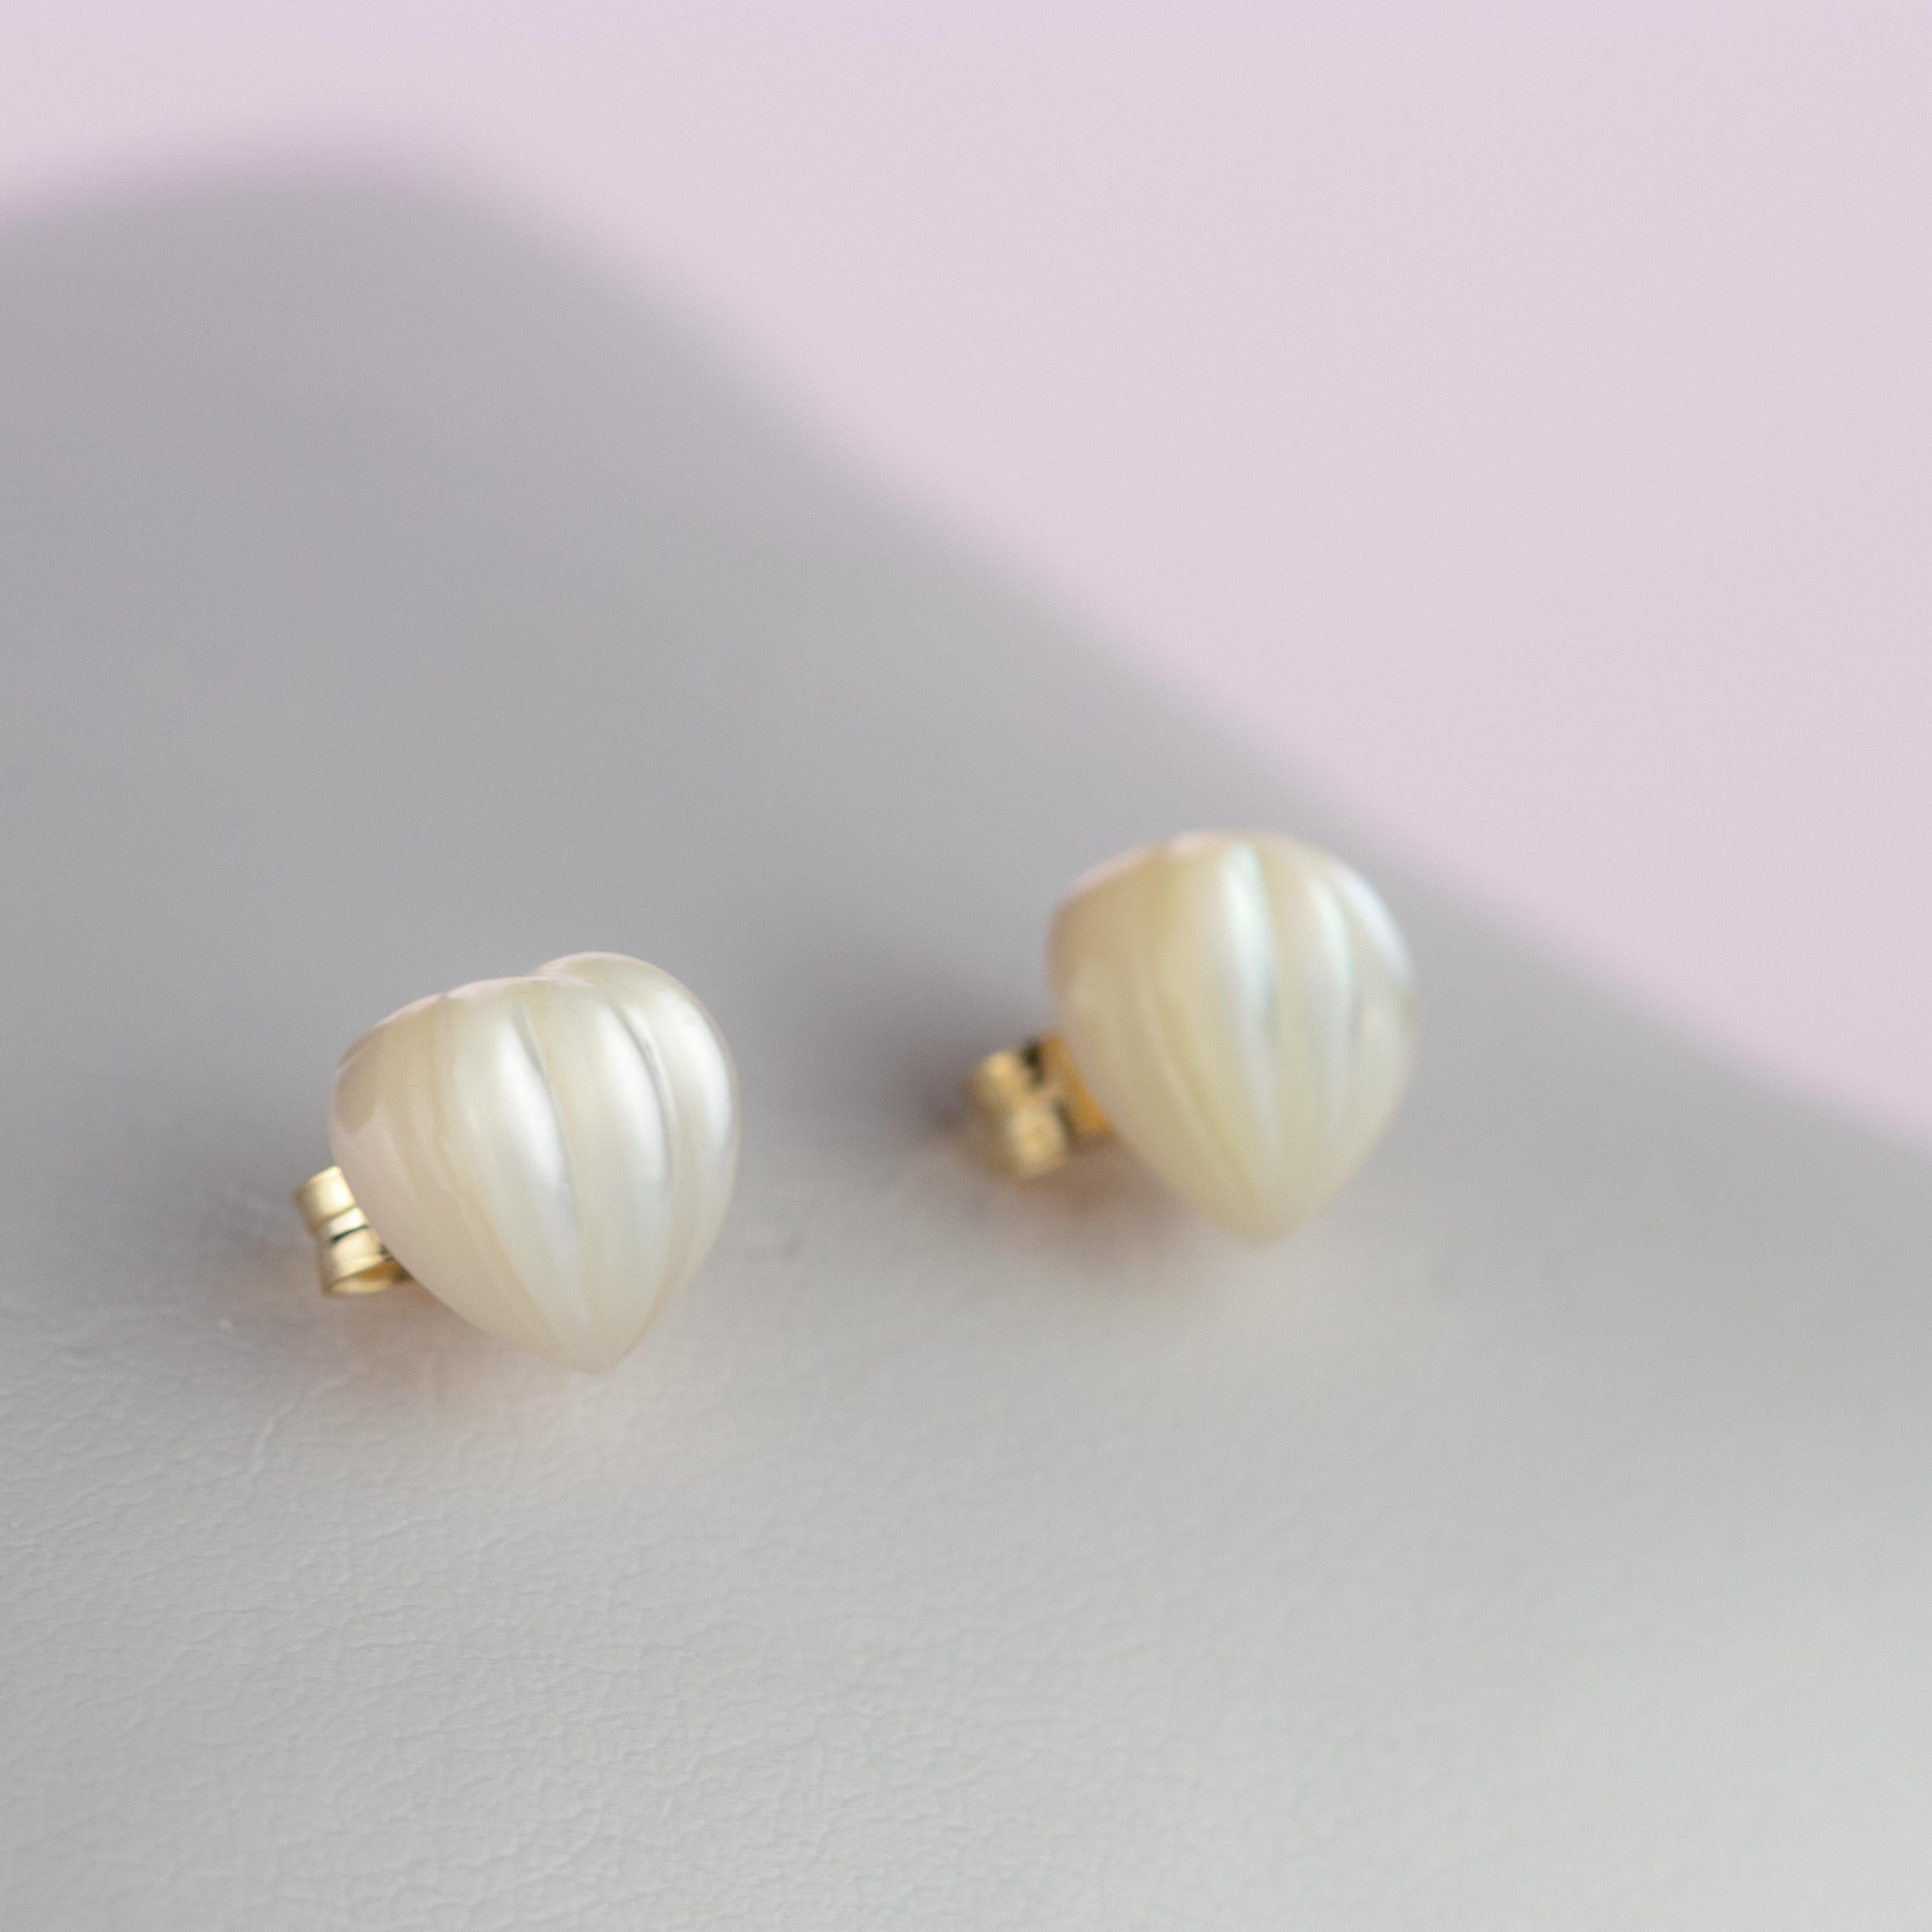 Take love with you everywhere! This breathtaking earrings have a sweet design and the most precious stones. The carved mother of pearl shape activates spiritual awareness, opens intuition and enhances your senses to find love. The deep color